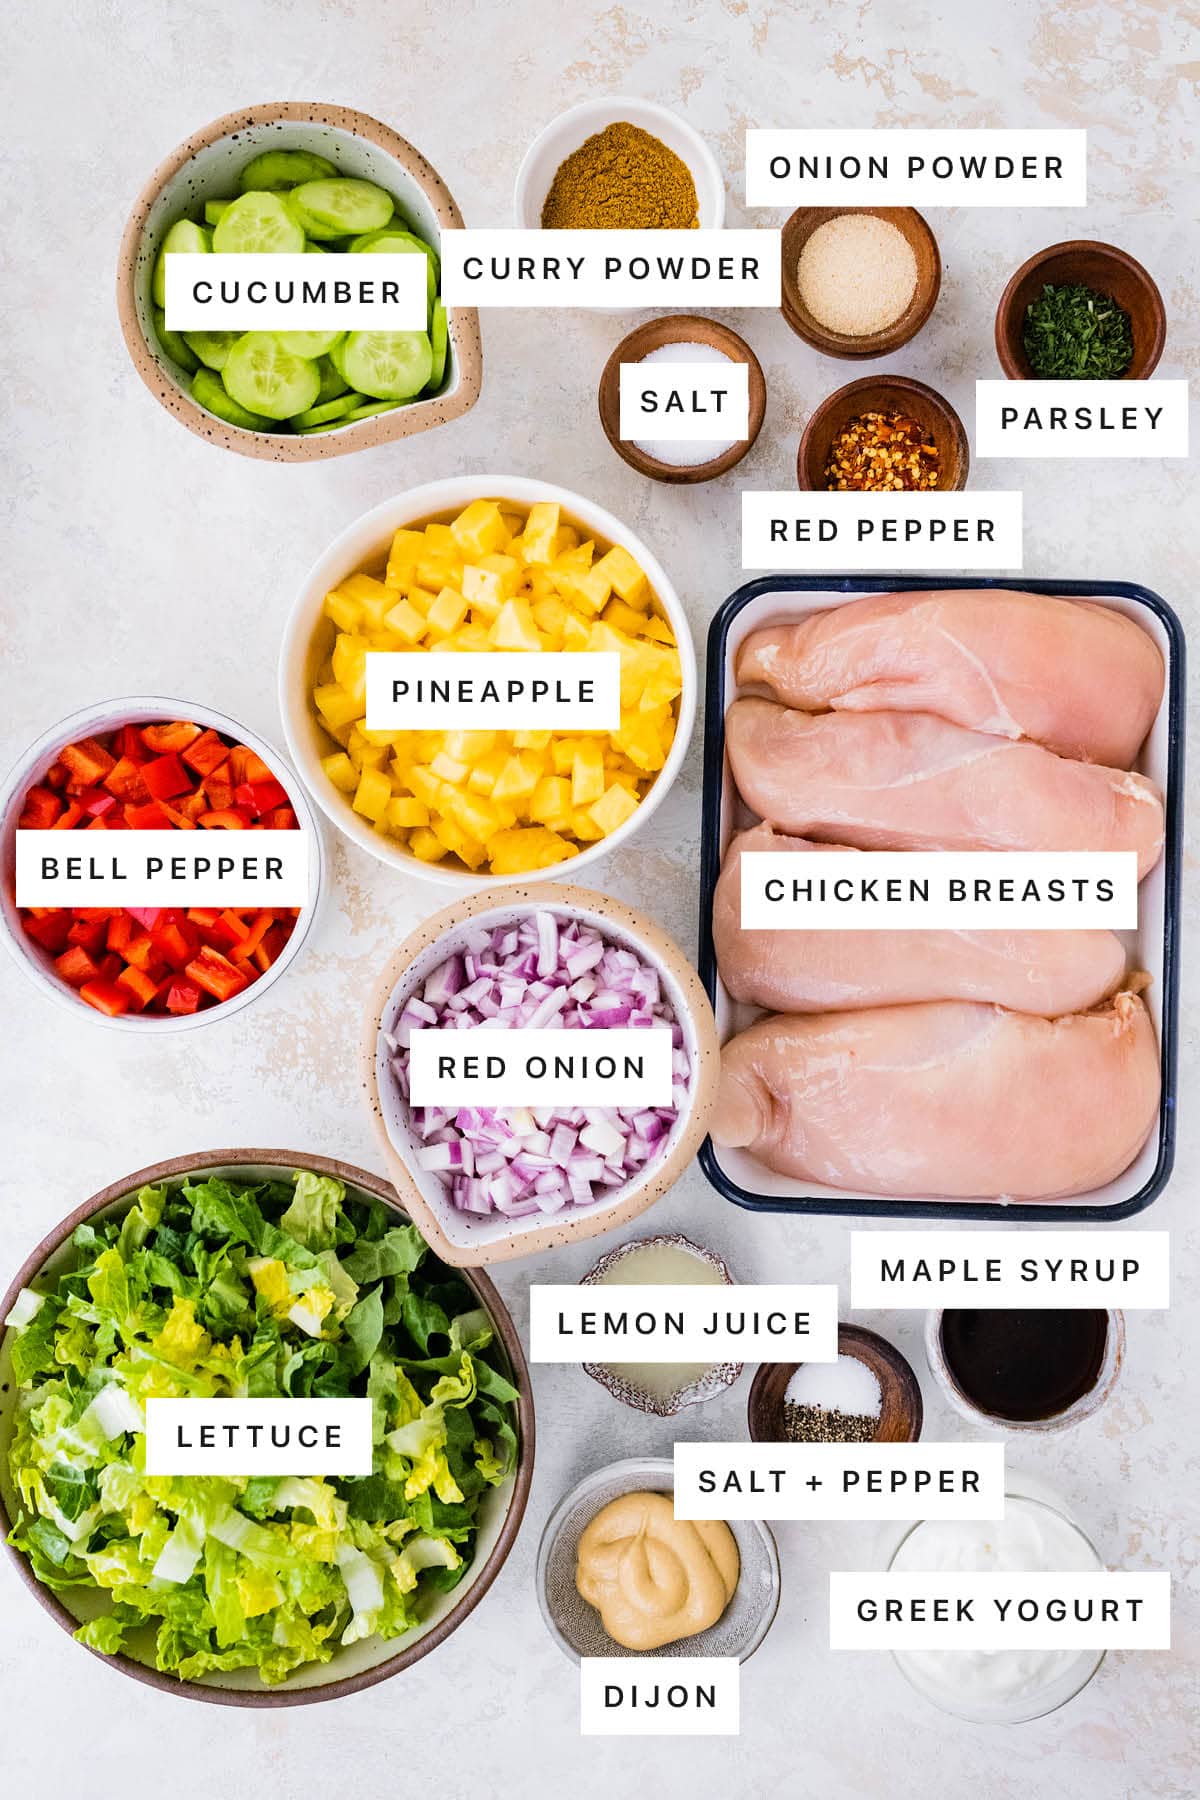 Ingredients measured out to make Thai Curry Chicken Salad: cucumber, curry powder, onion powder, salt, red pepper, parsley, pineapple, bell pepper, red onion, chicken breasts, lemon juice, maple syrup, lettuce, pepper, dijon and Greek yogurt.